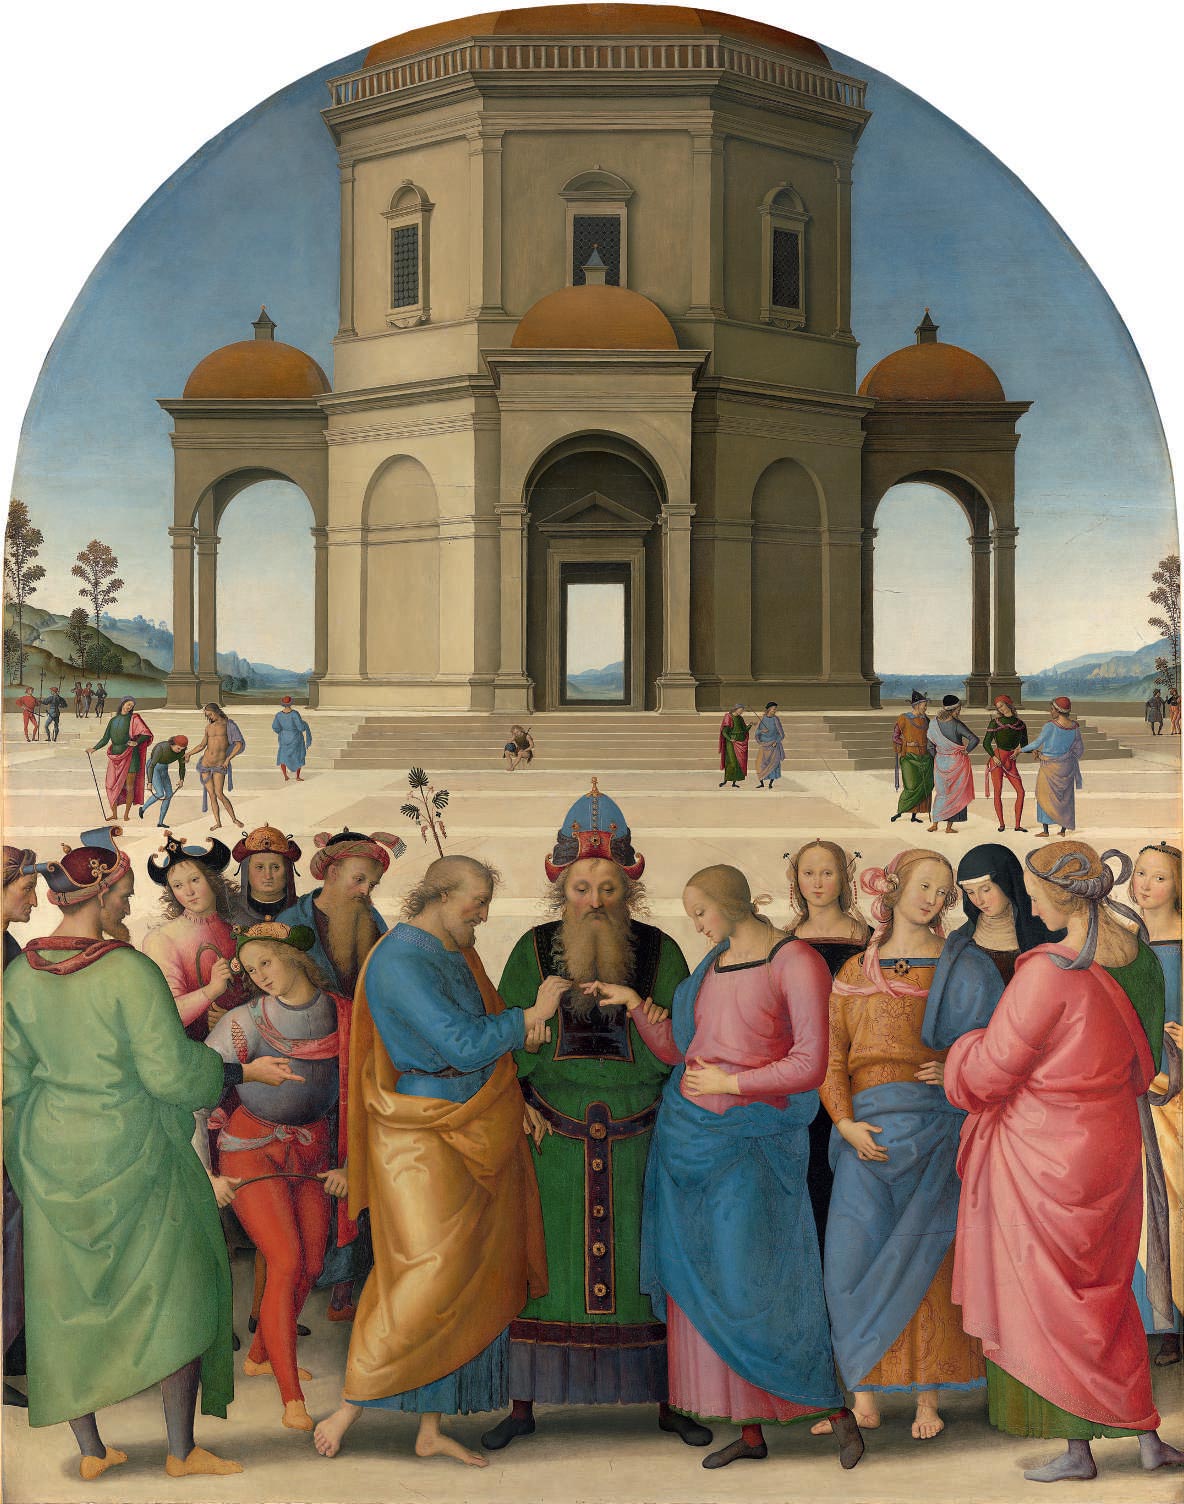 Perugino, Marriage of the Virgin (1501-1504; oil on panel, 234 x 185 cm; Caen, Musée des Beaux-Arts, inv. 28)